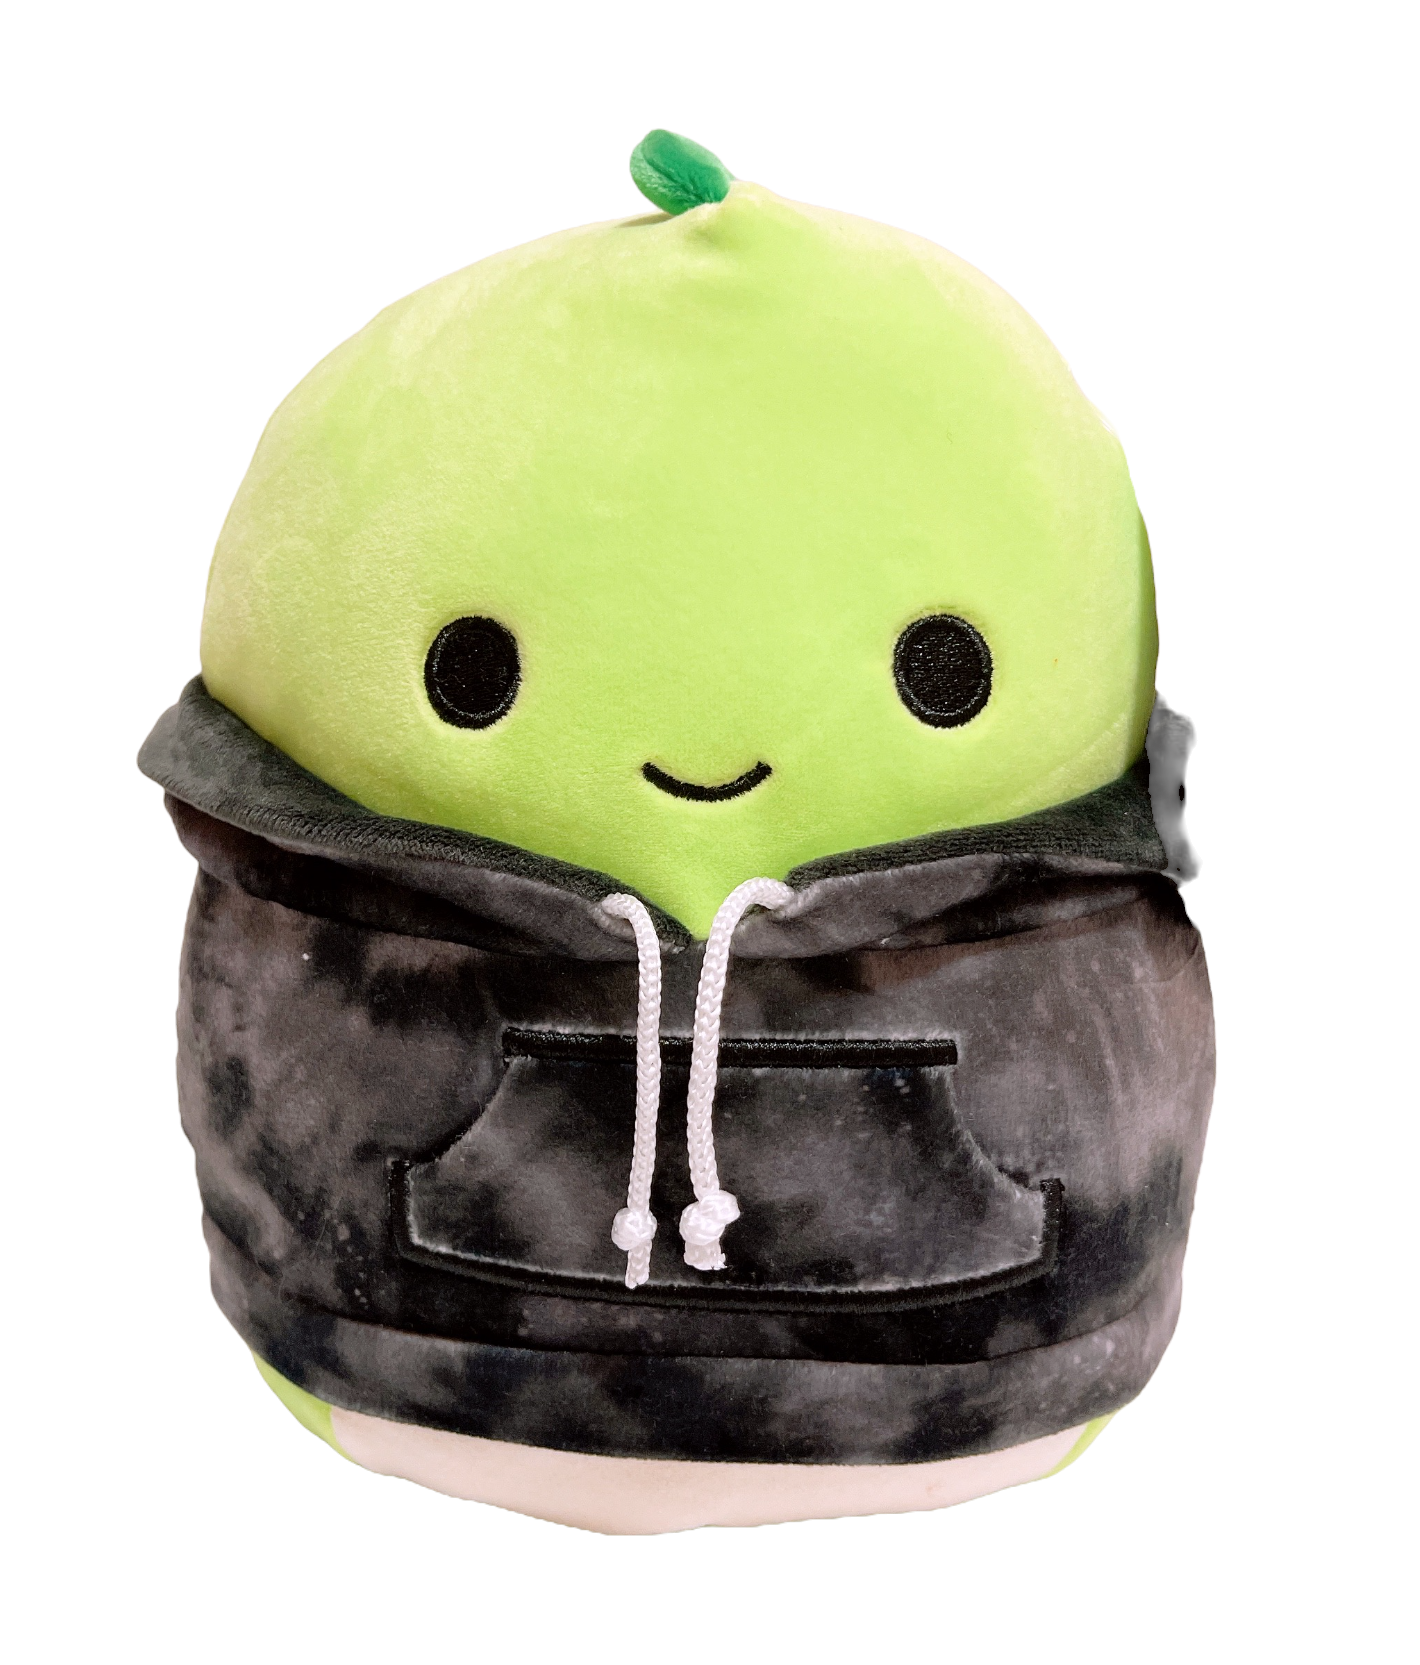 Squishmallows Hoodie Animal Squad 8" Danny the Green Dino Plush Doll Super Soft - image 1 of 3